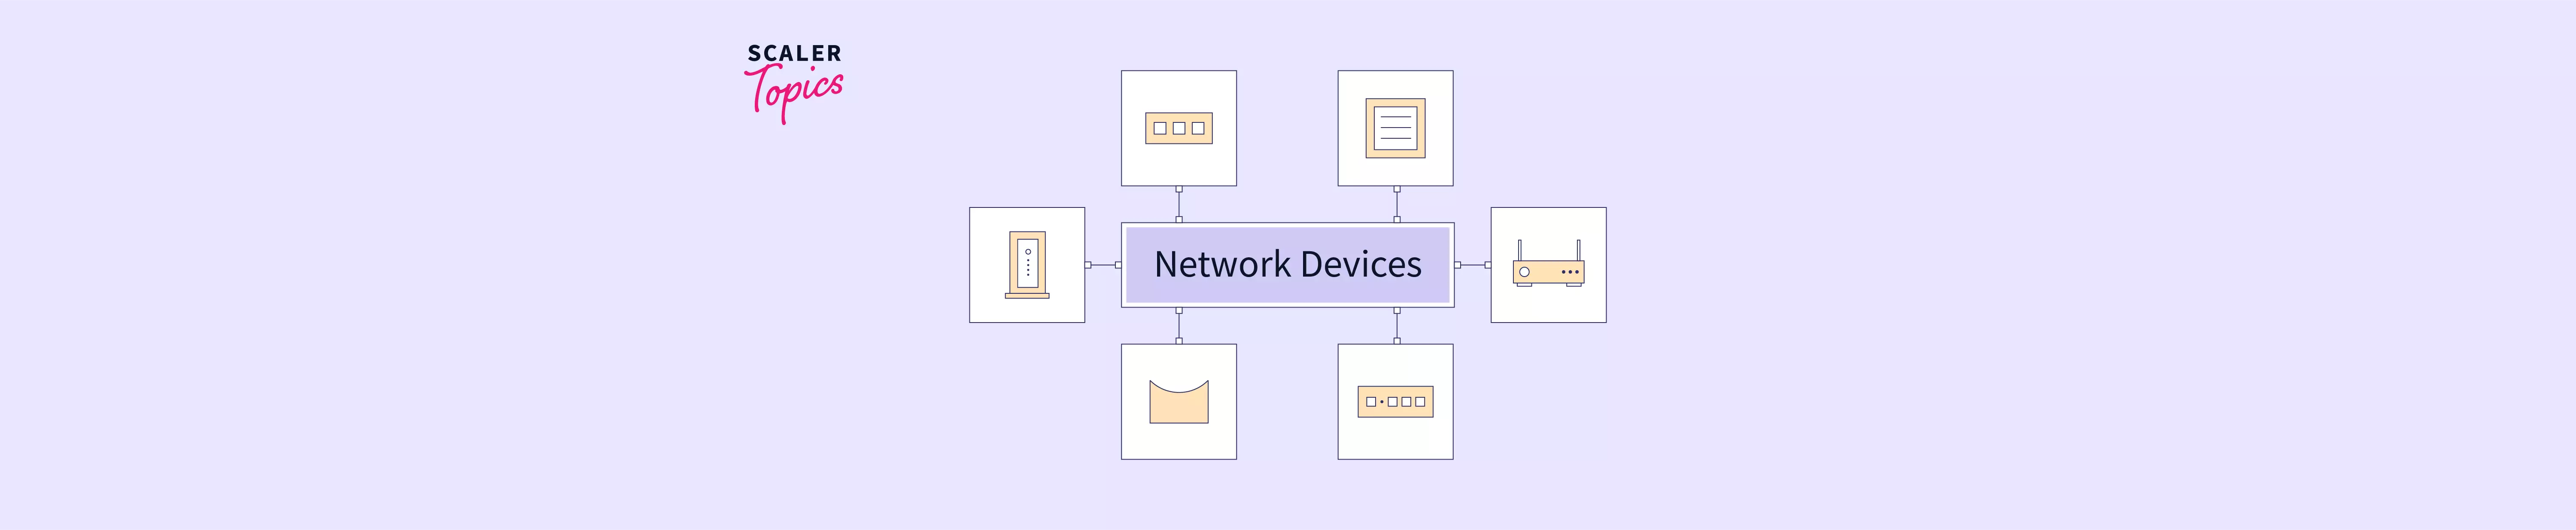 Types of Network Devices in Computer Network - Scaler Topics